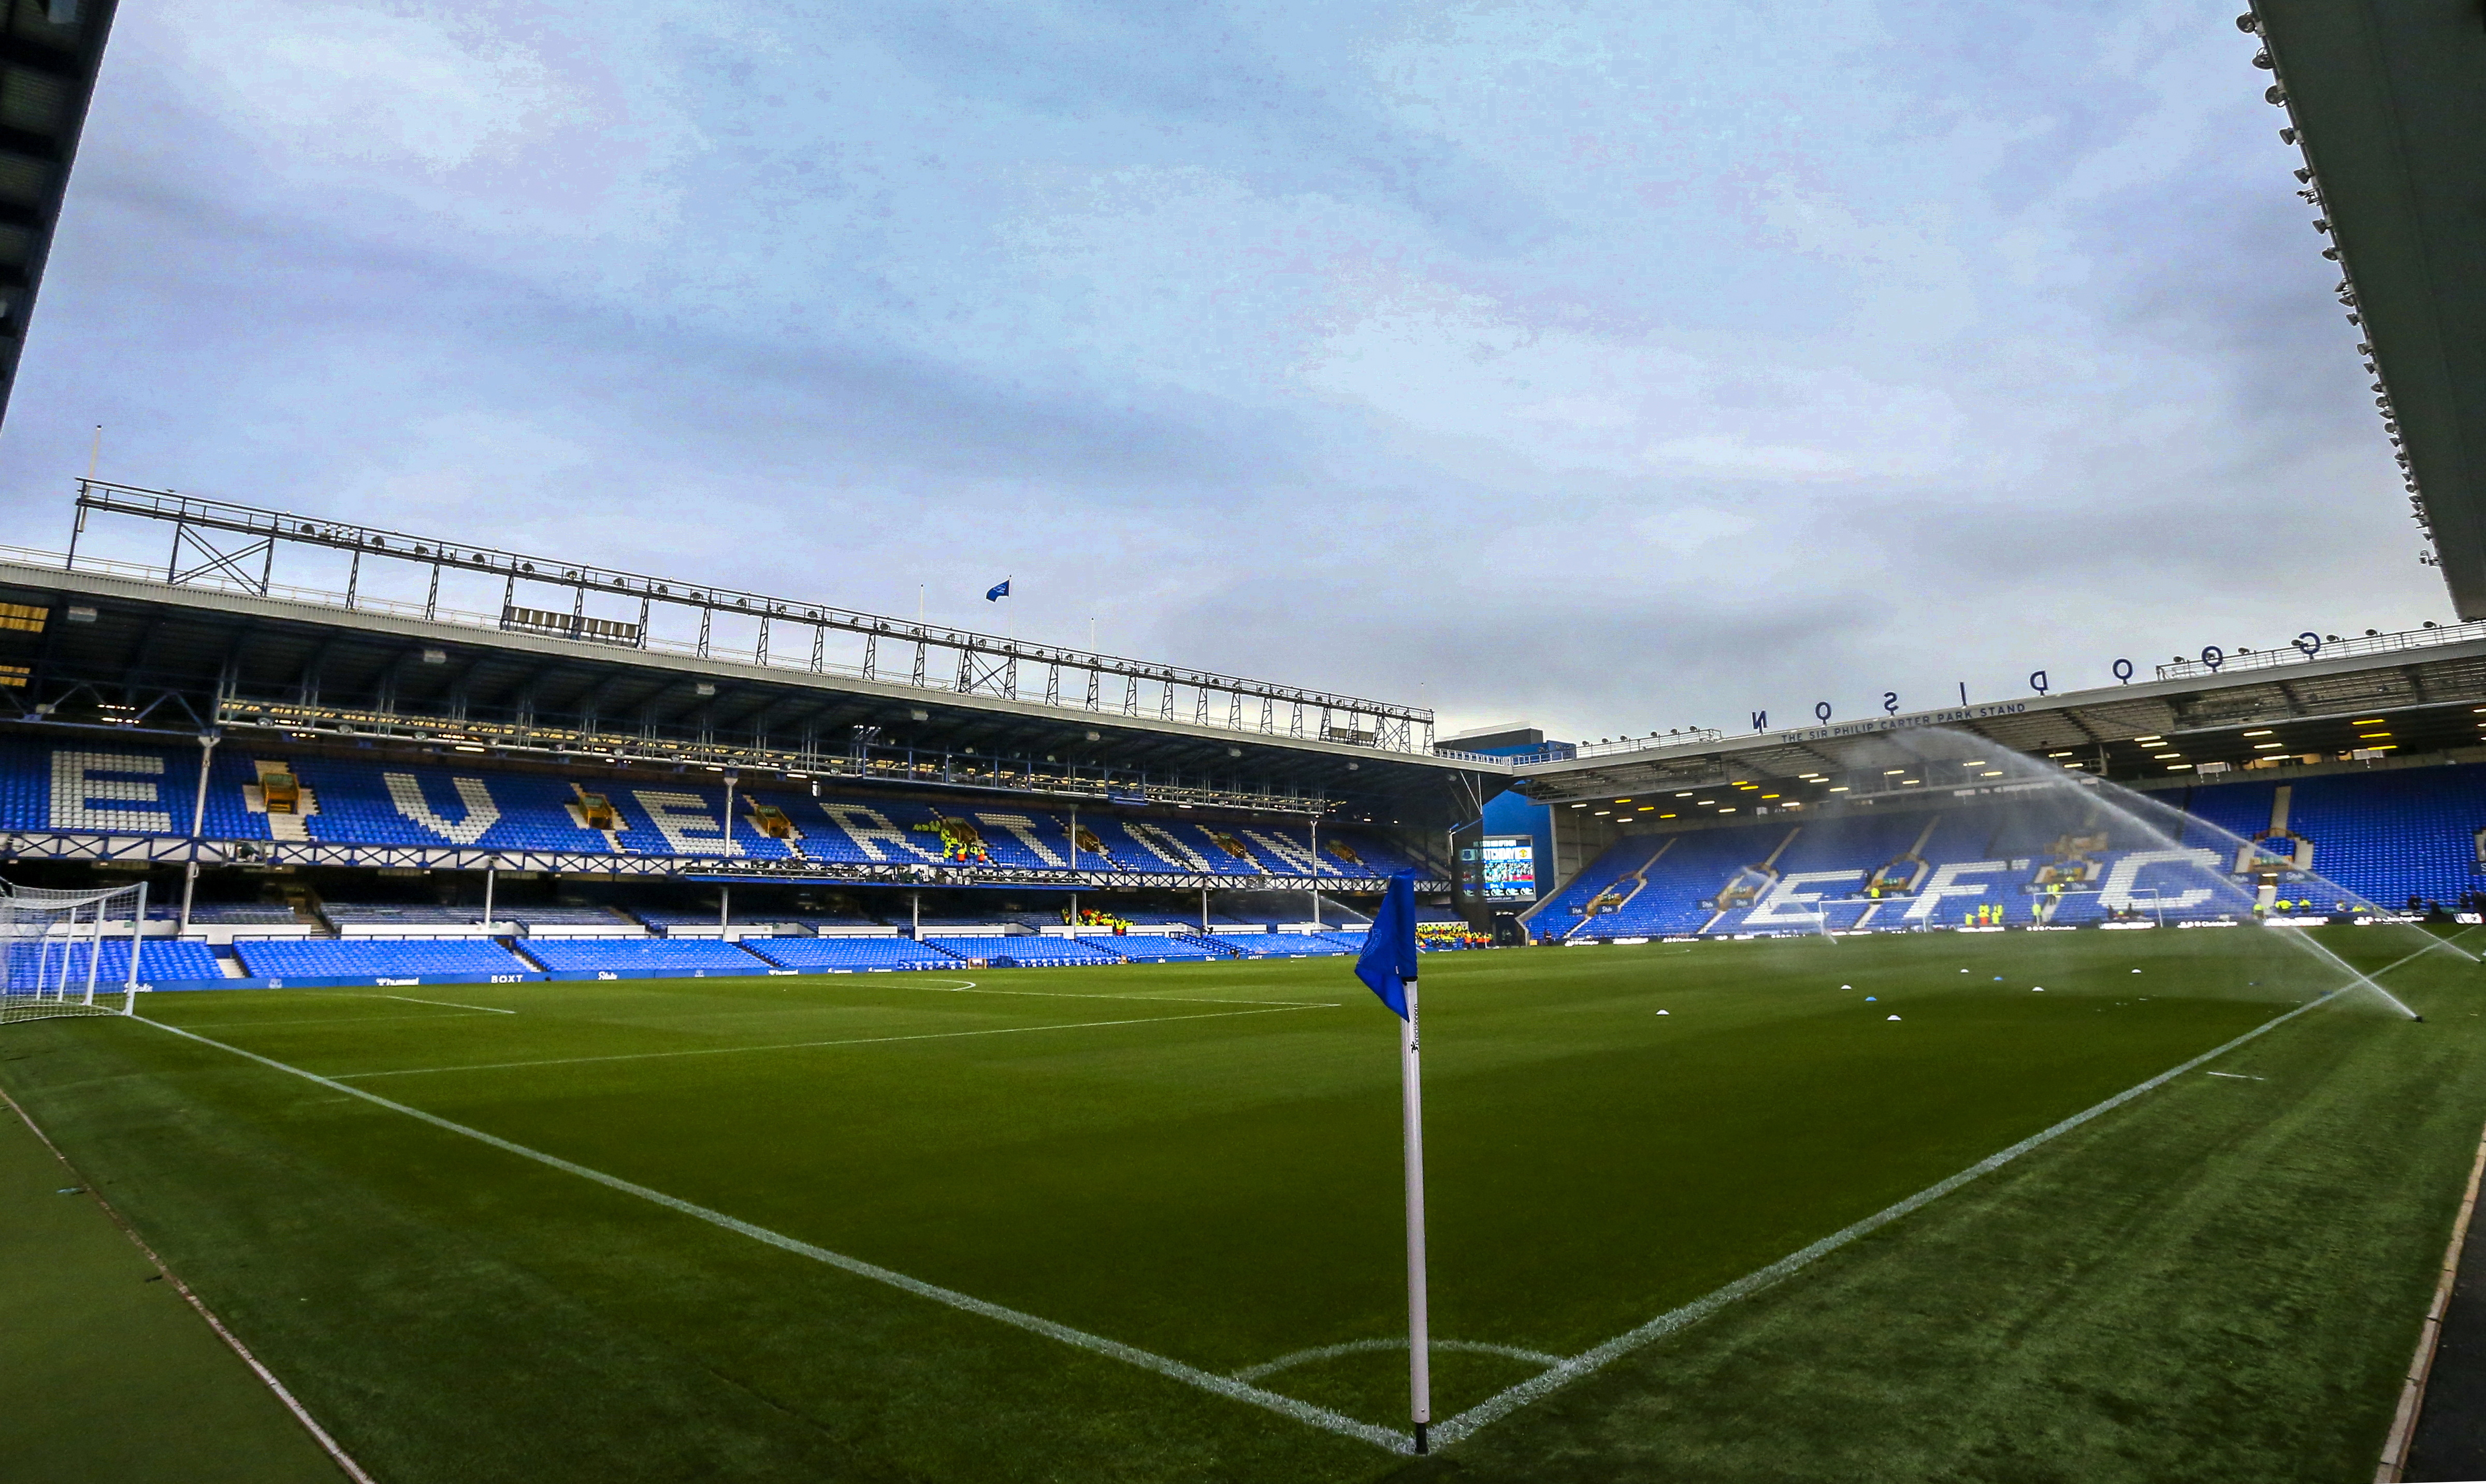 Everton hope to move from Goodison Park after 132 years in 2024